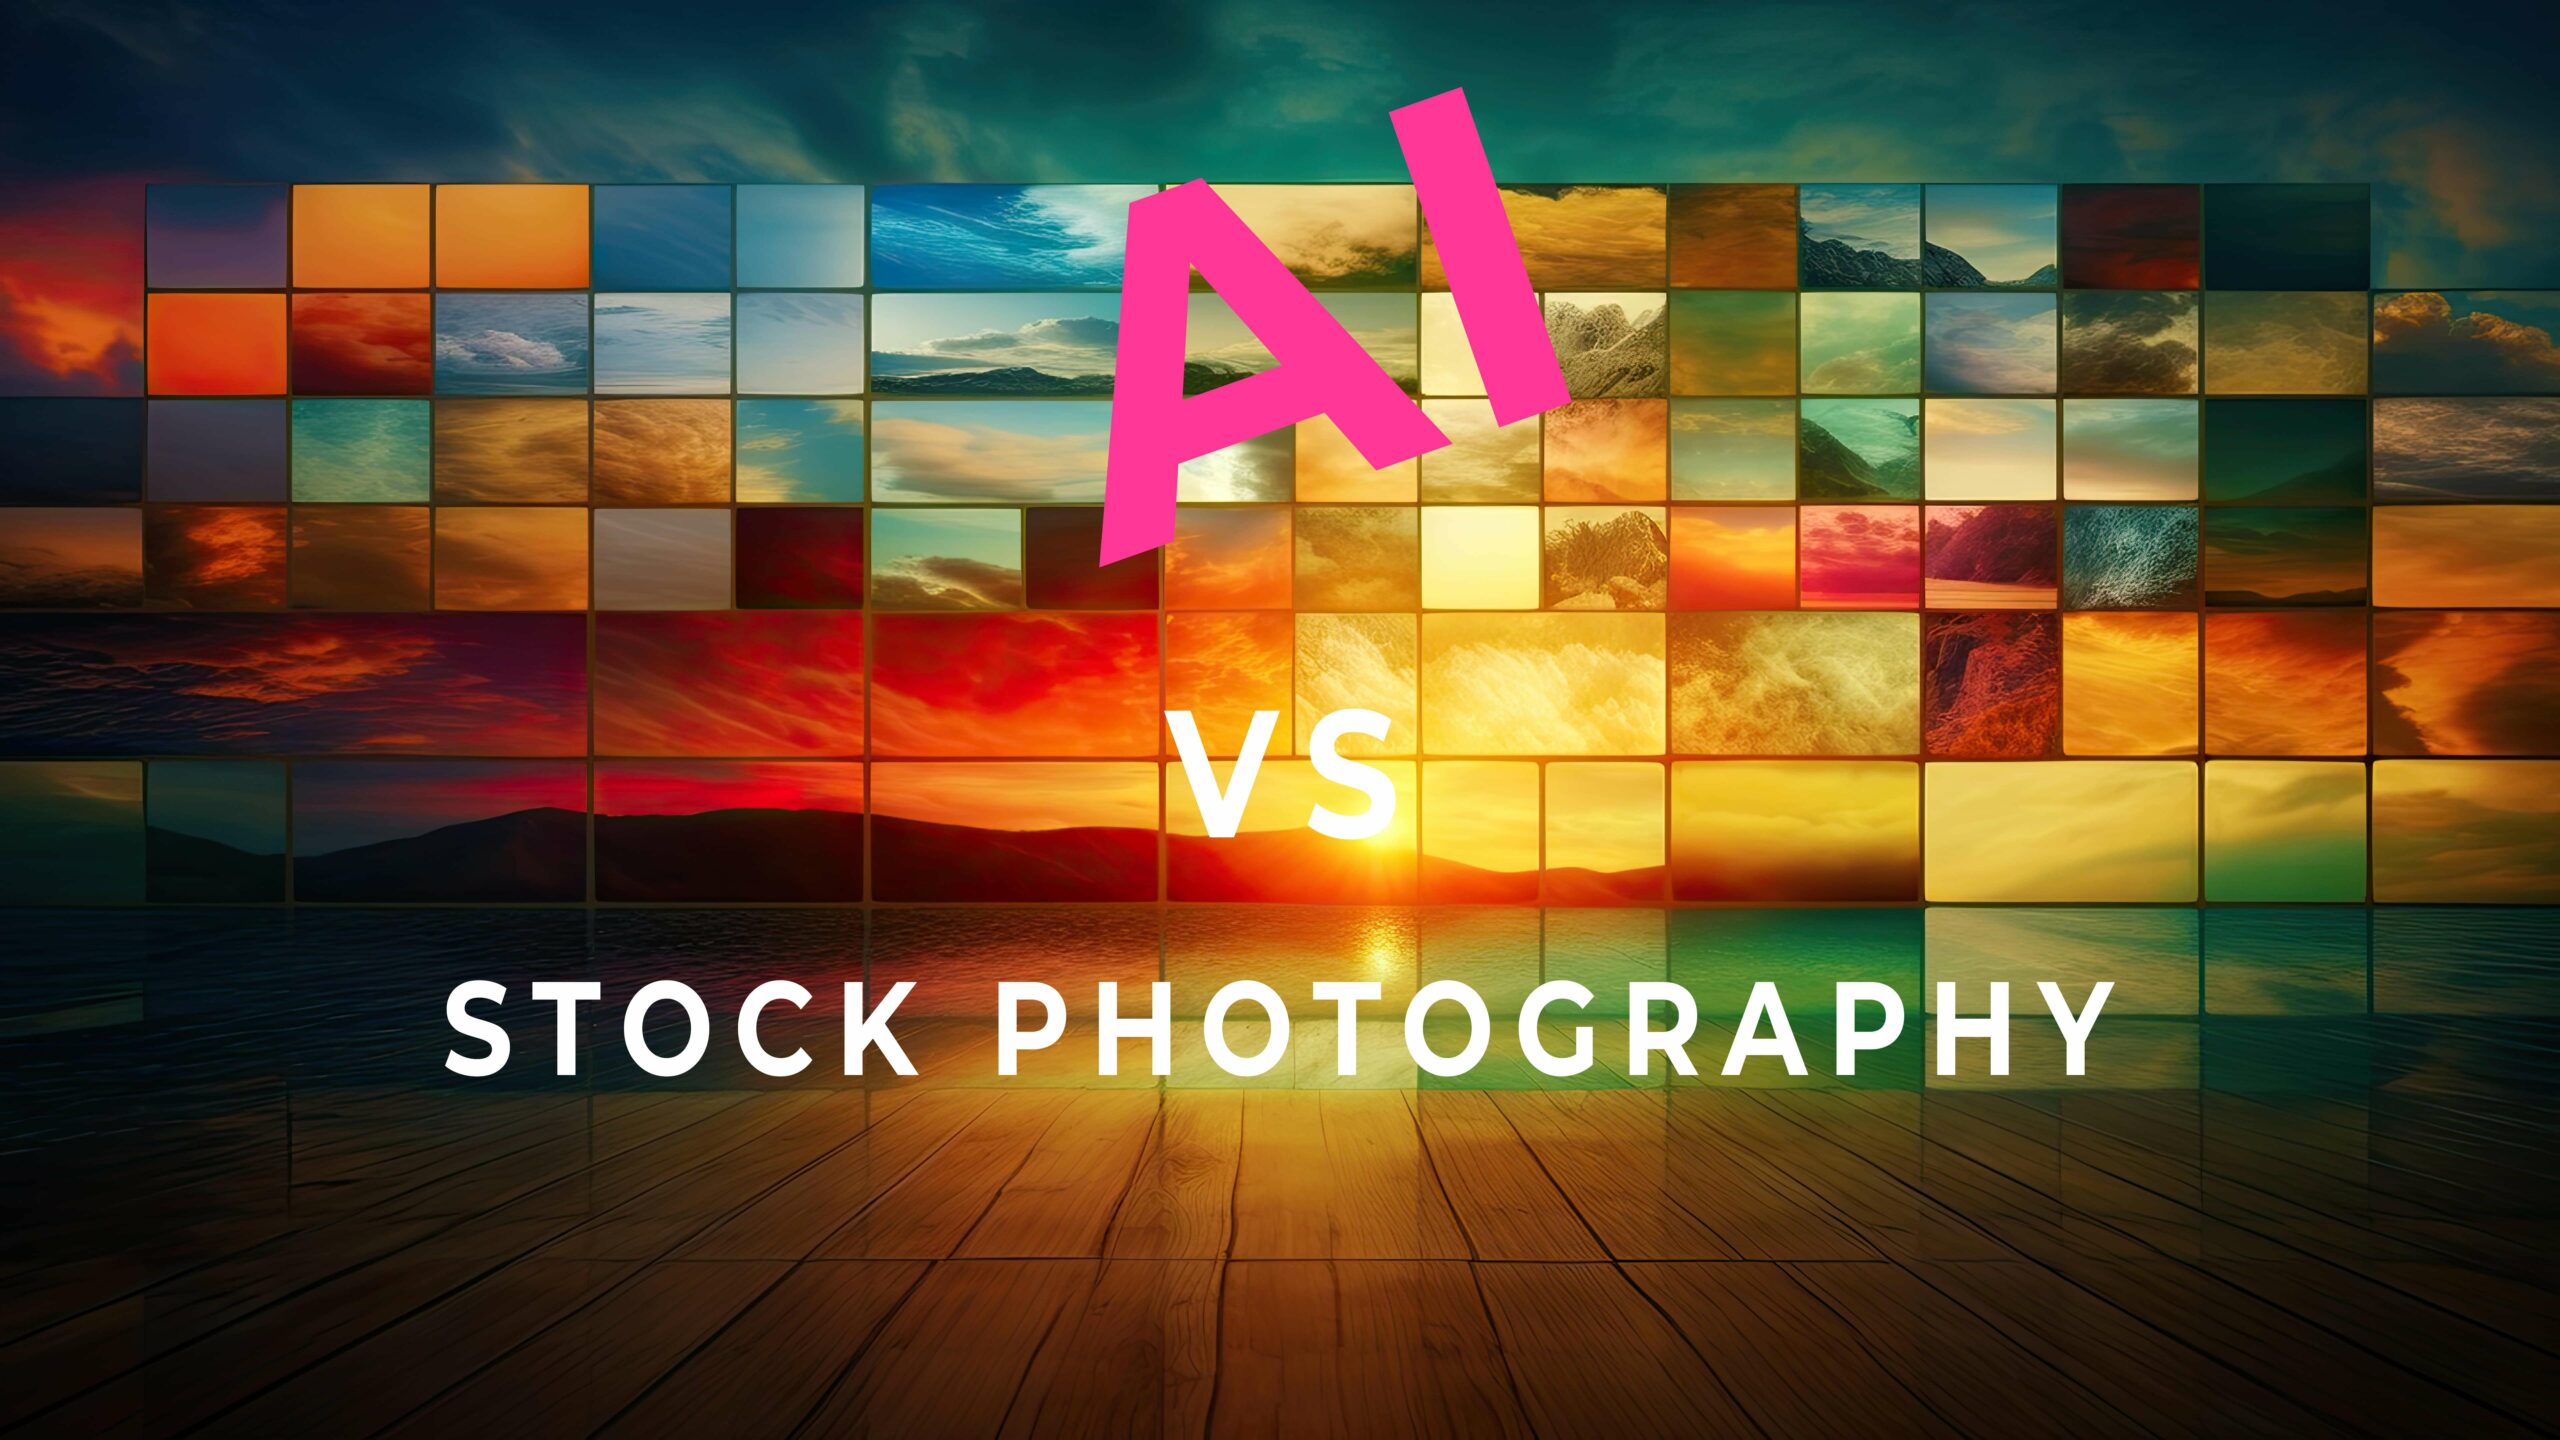 Stock Photography is Dead: AI Reigns